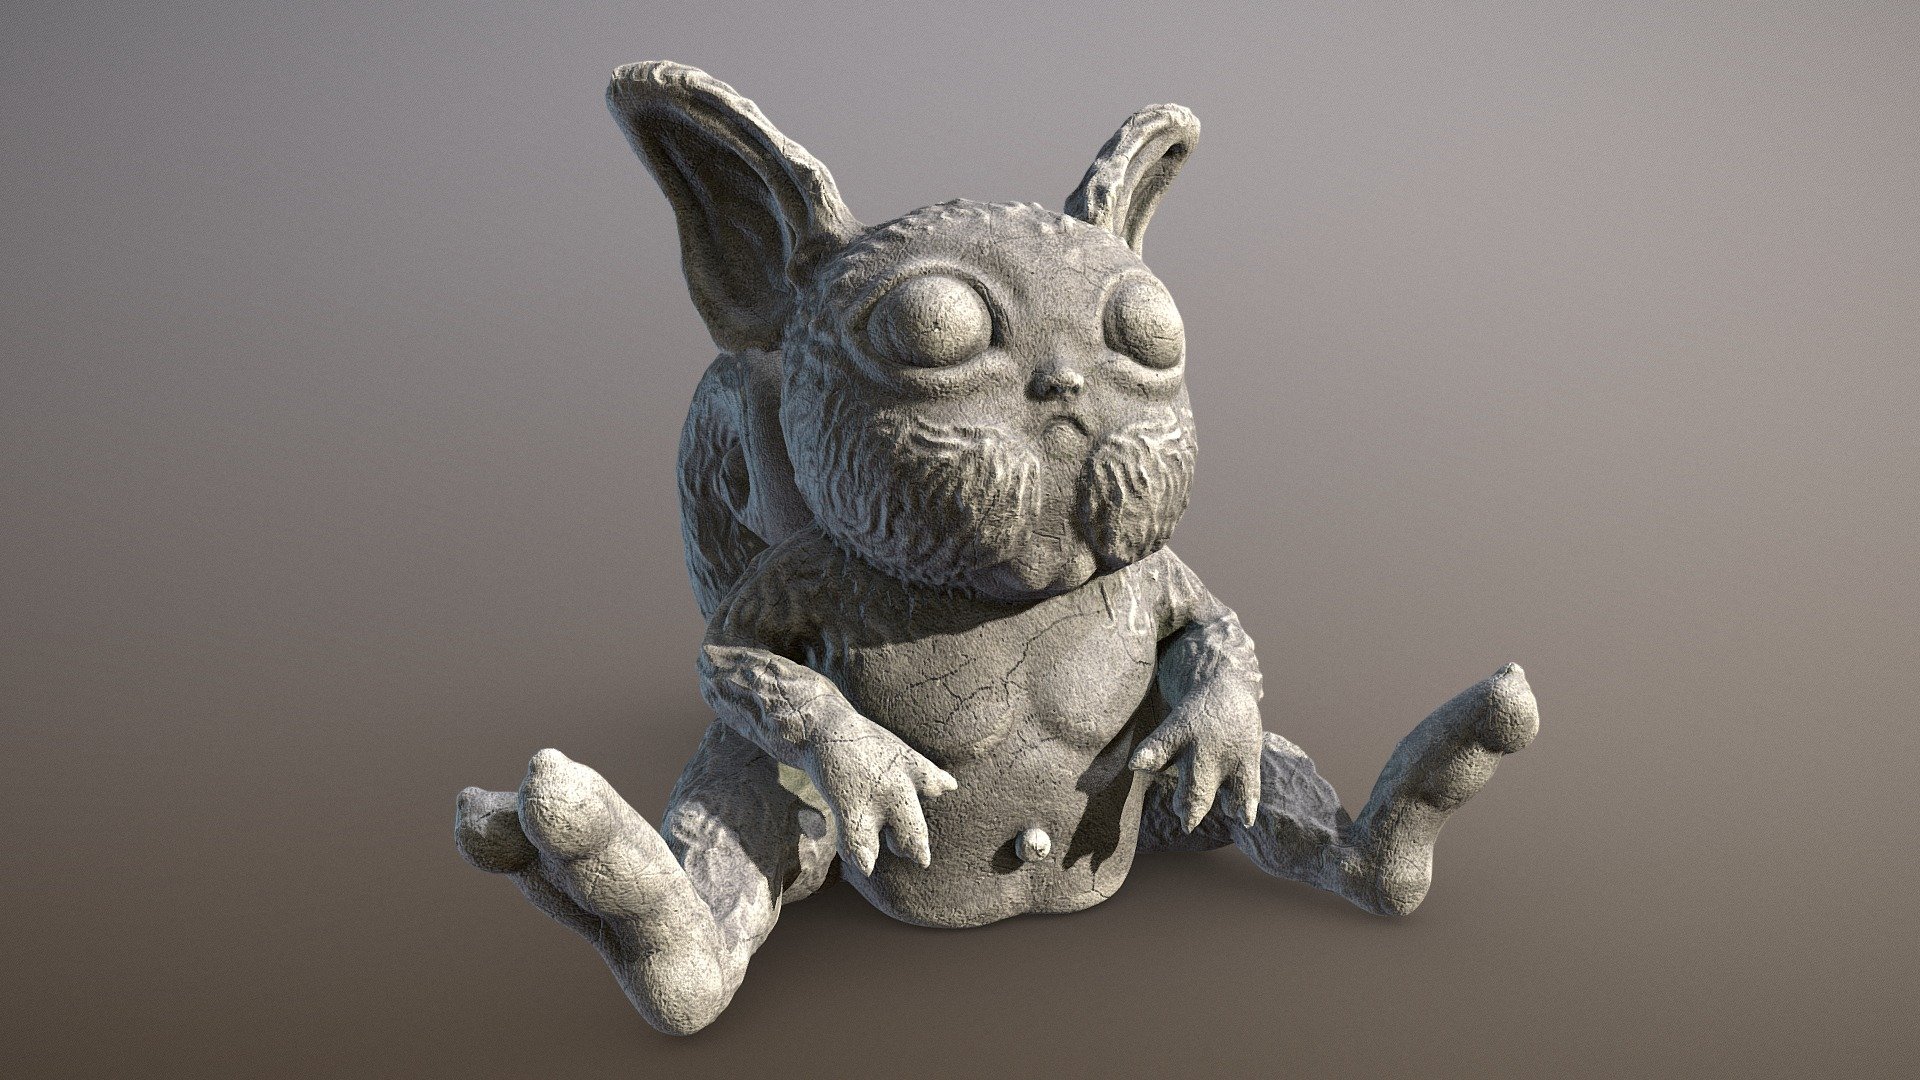 This little squirrel imp creature is my creation from the second chapter of Zacharias Reinhardt's excellent scultping for Blender masterclass. Can highly recommend the course for artists looking to become more familiar with Blender's scultping capabilities. 

Original sculpt is ~4M tris in Blender, reduced the model using Instant Meshes to remesh the model, then baked down my high to low poly using Marmoset Toolbag 3, before doing my final texturing in Substance Painter 3d model